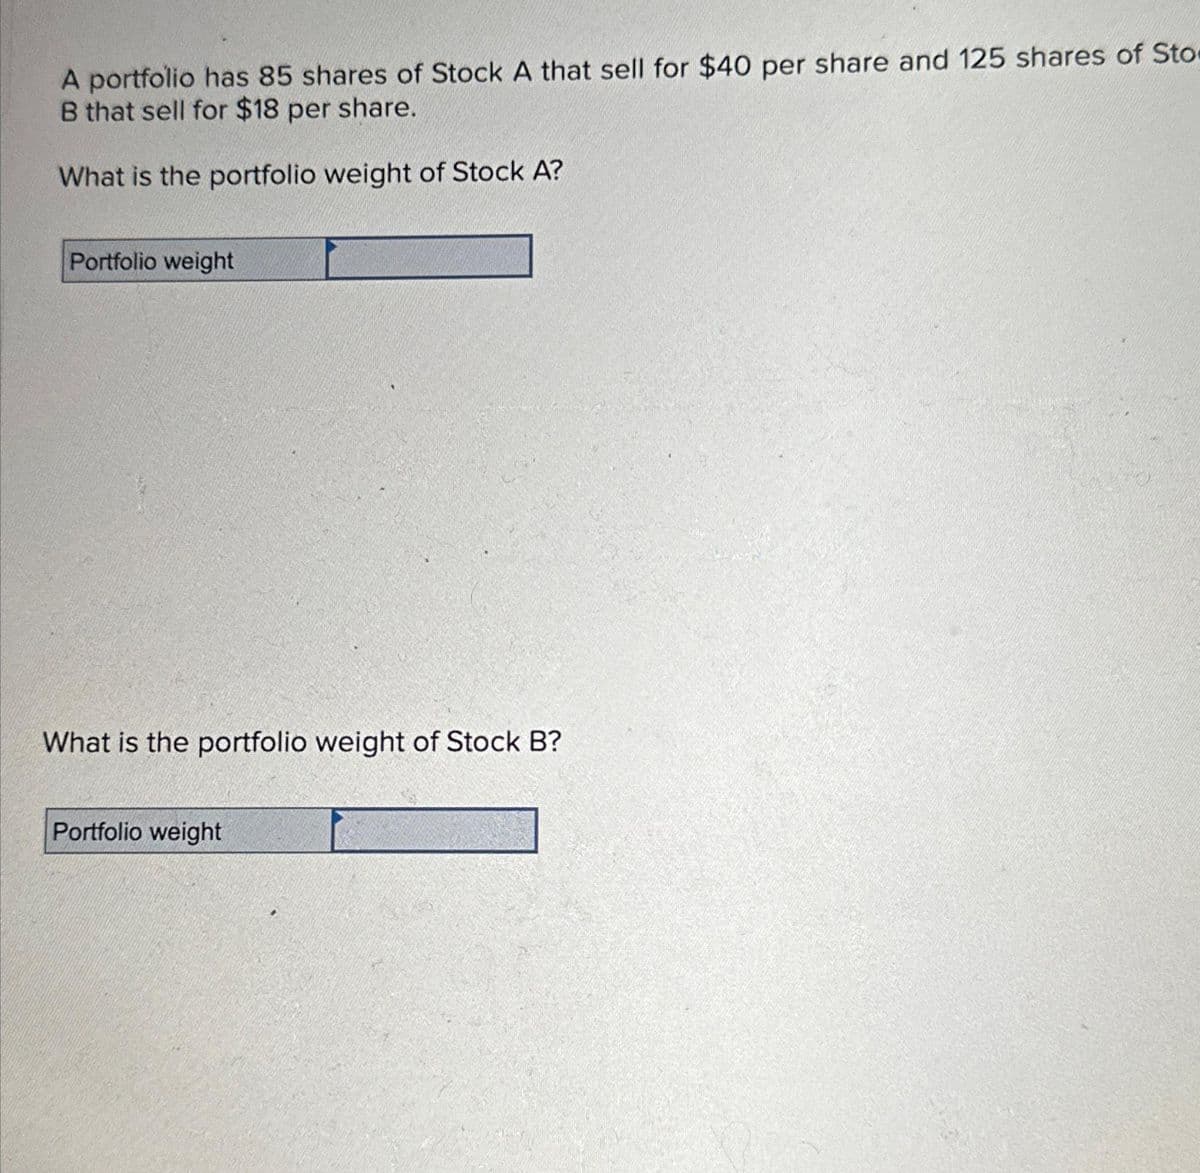 A portfolio has 85 shares of Stock A that sell for $40 per share and 125 shares of Sto
B that sell for $18 per share.
What is the portfolio weight of Stock A?
Portfolio weight
What is the portfolio weight of Stock B?
Portfolio weight